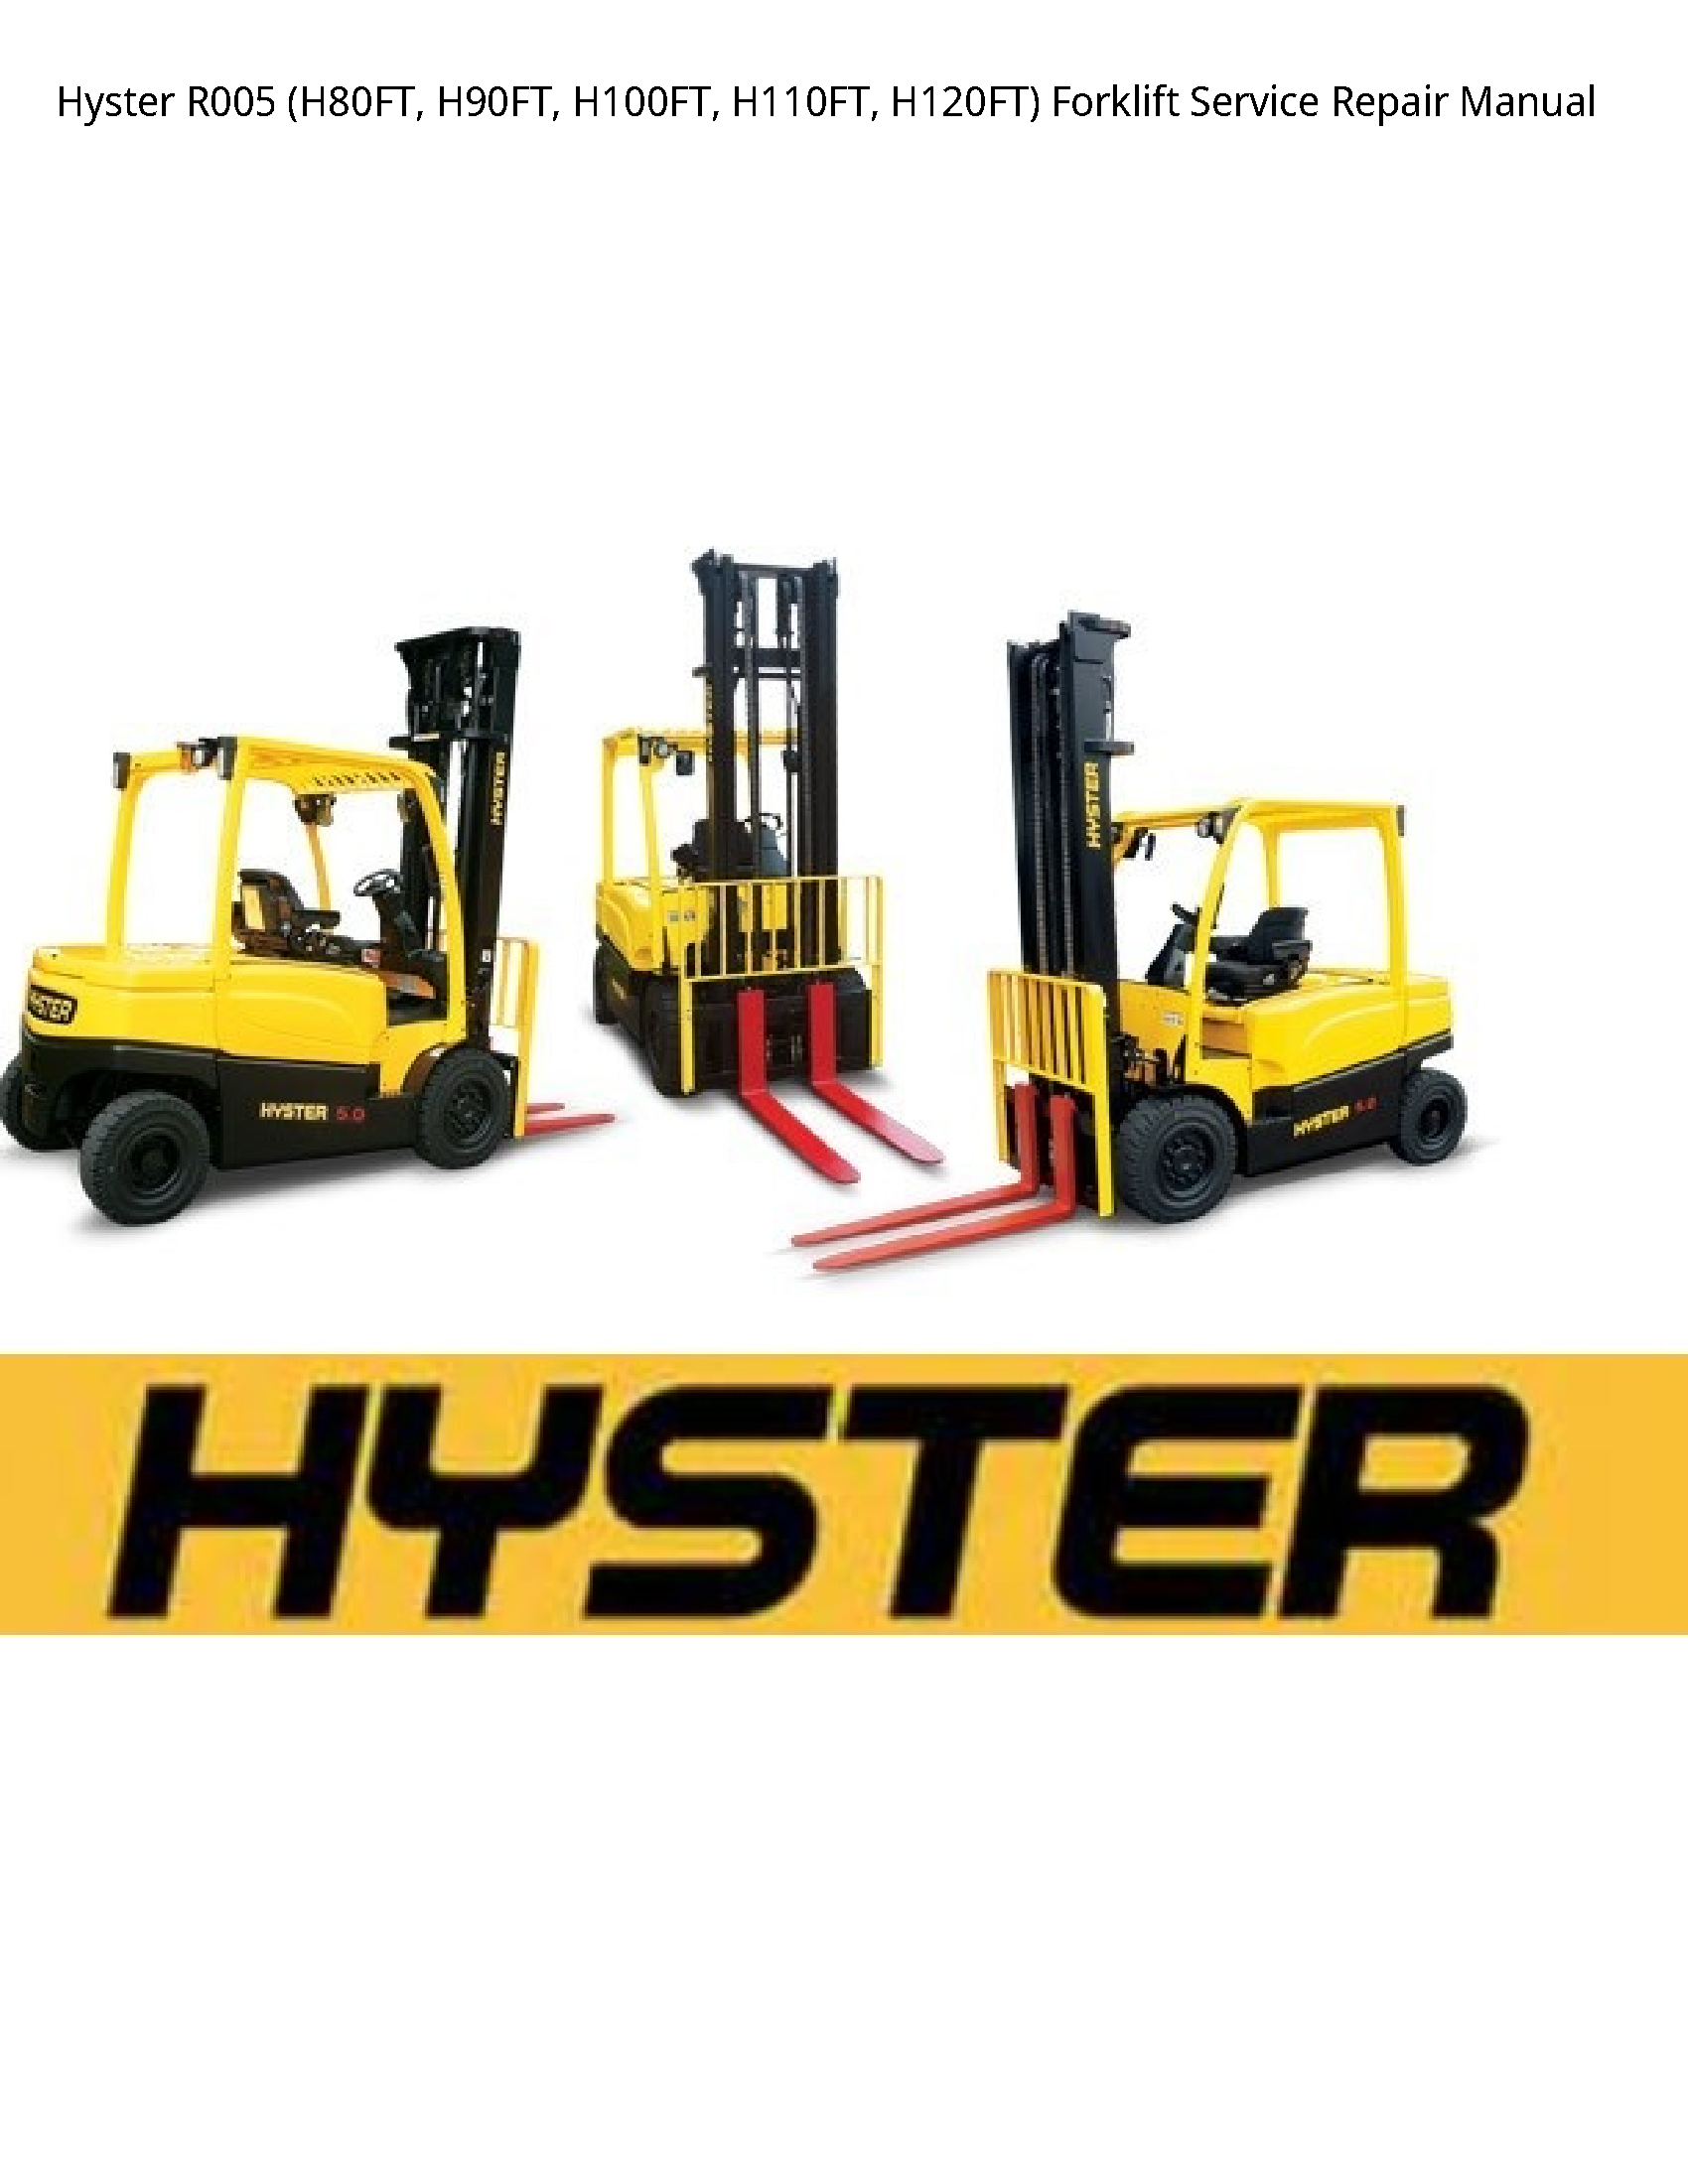 Hyster R005 Forklift manual